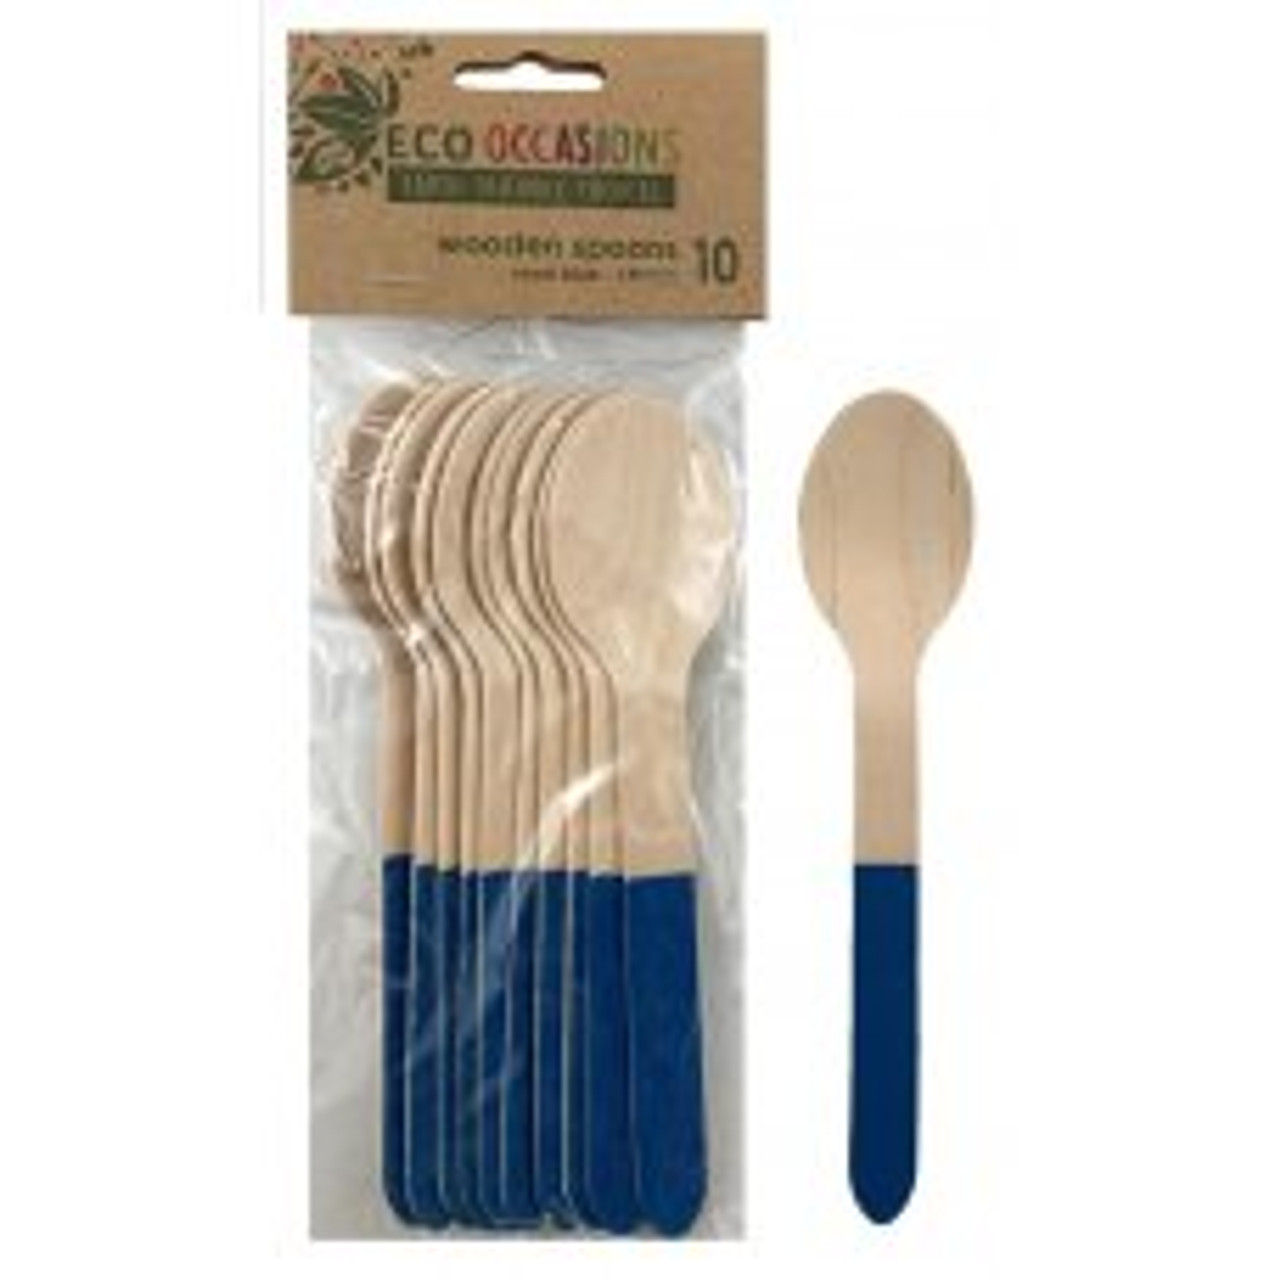 ECO WOODEN CUTLERY ROYAL BLUE SPOONS P10